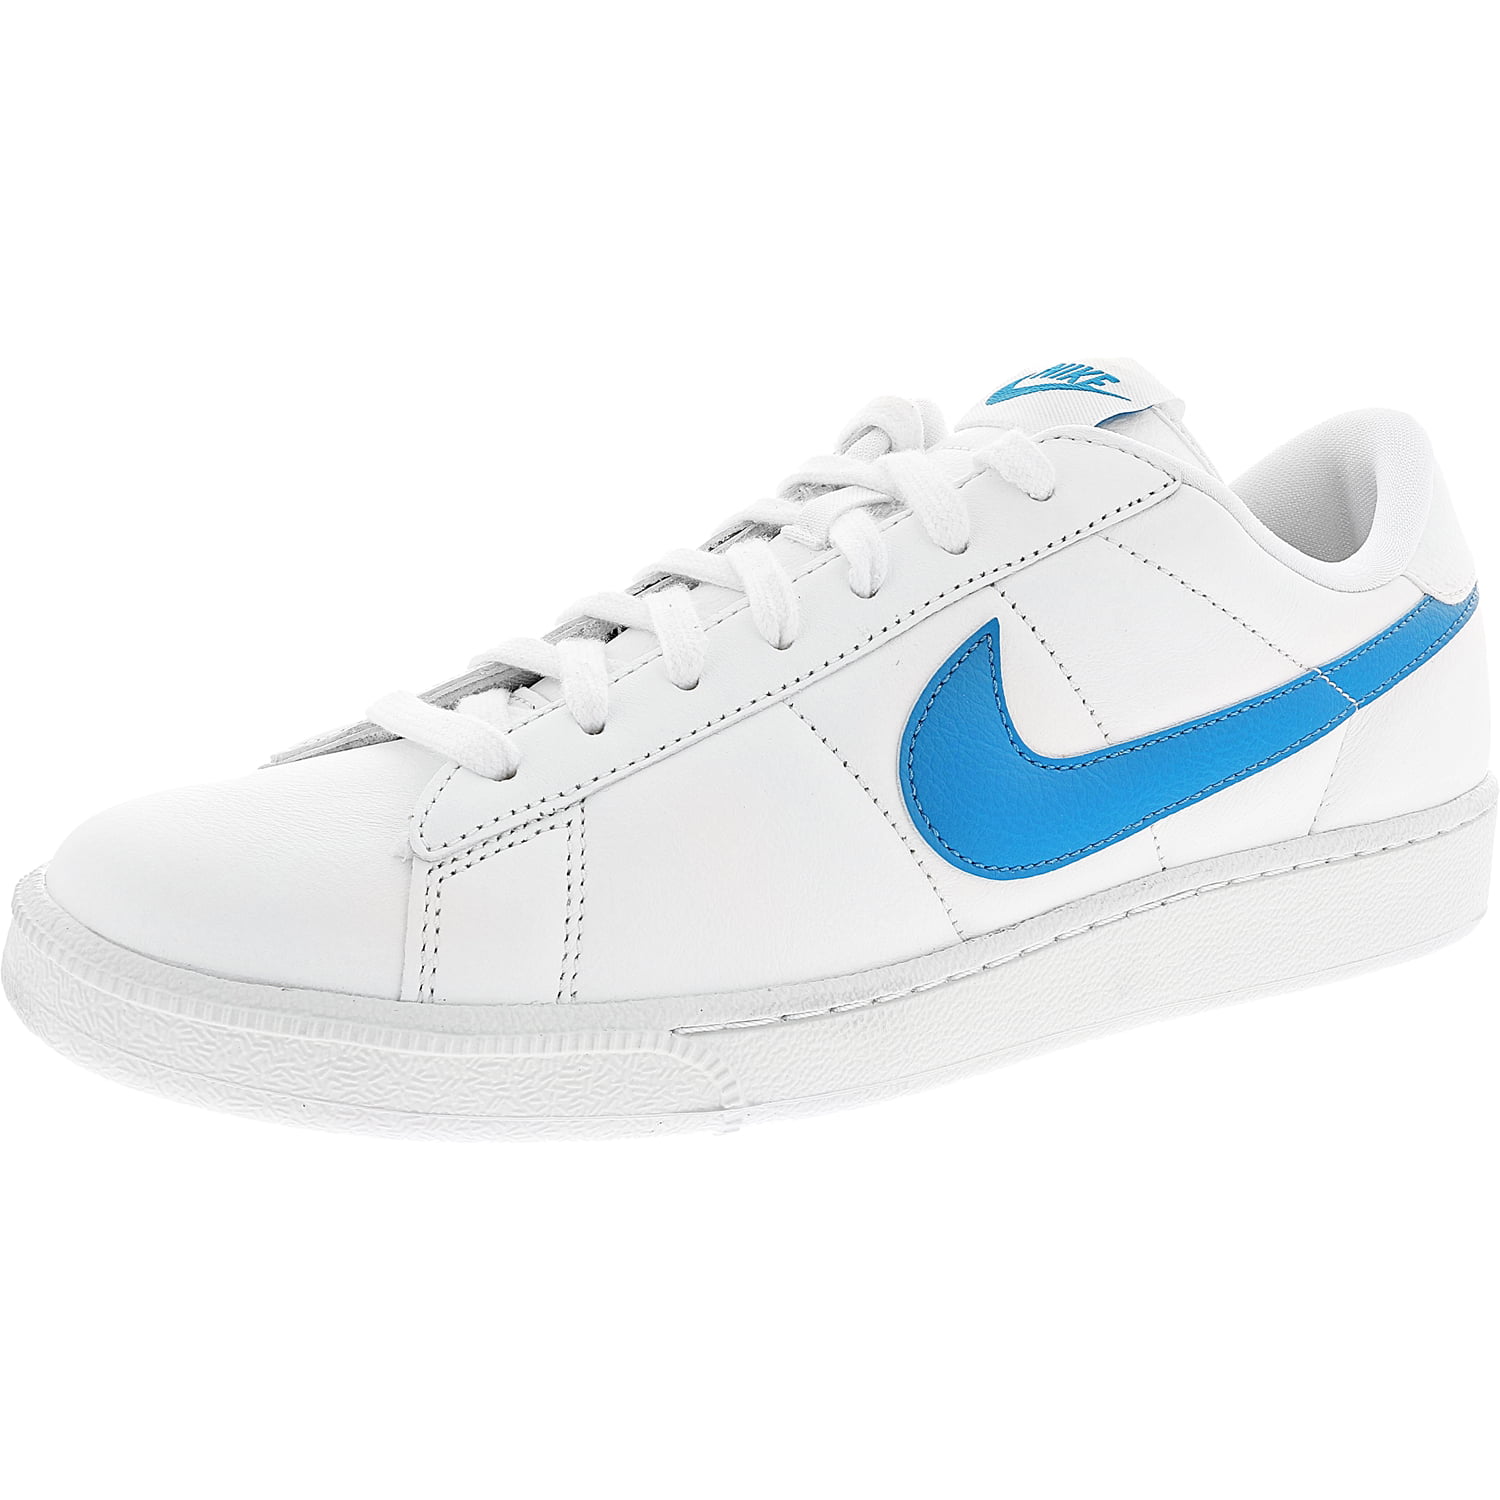 Nike Men's Tennis Classic / Blue Ankle-High Suede Fashion - 9M -